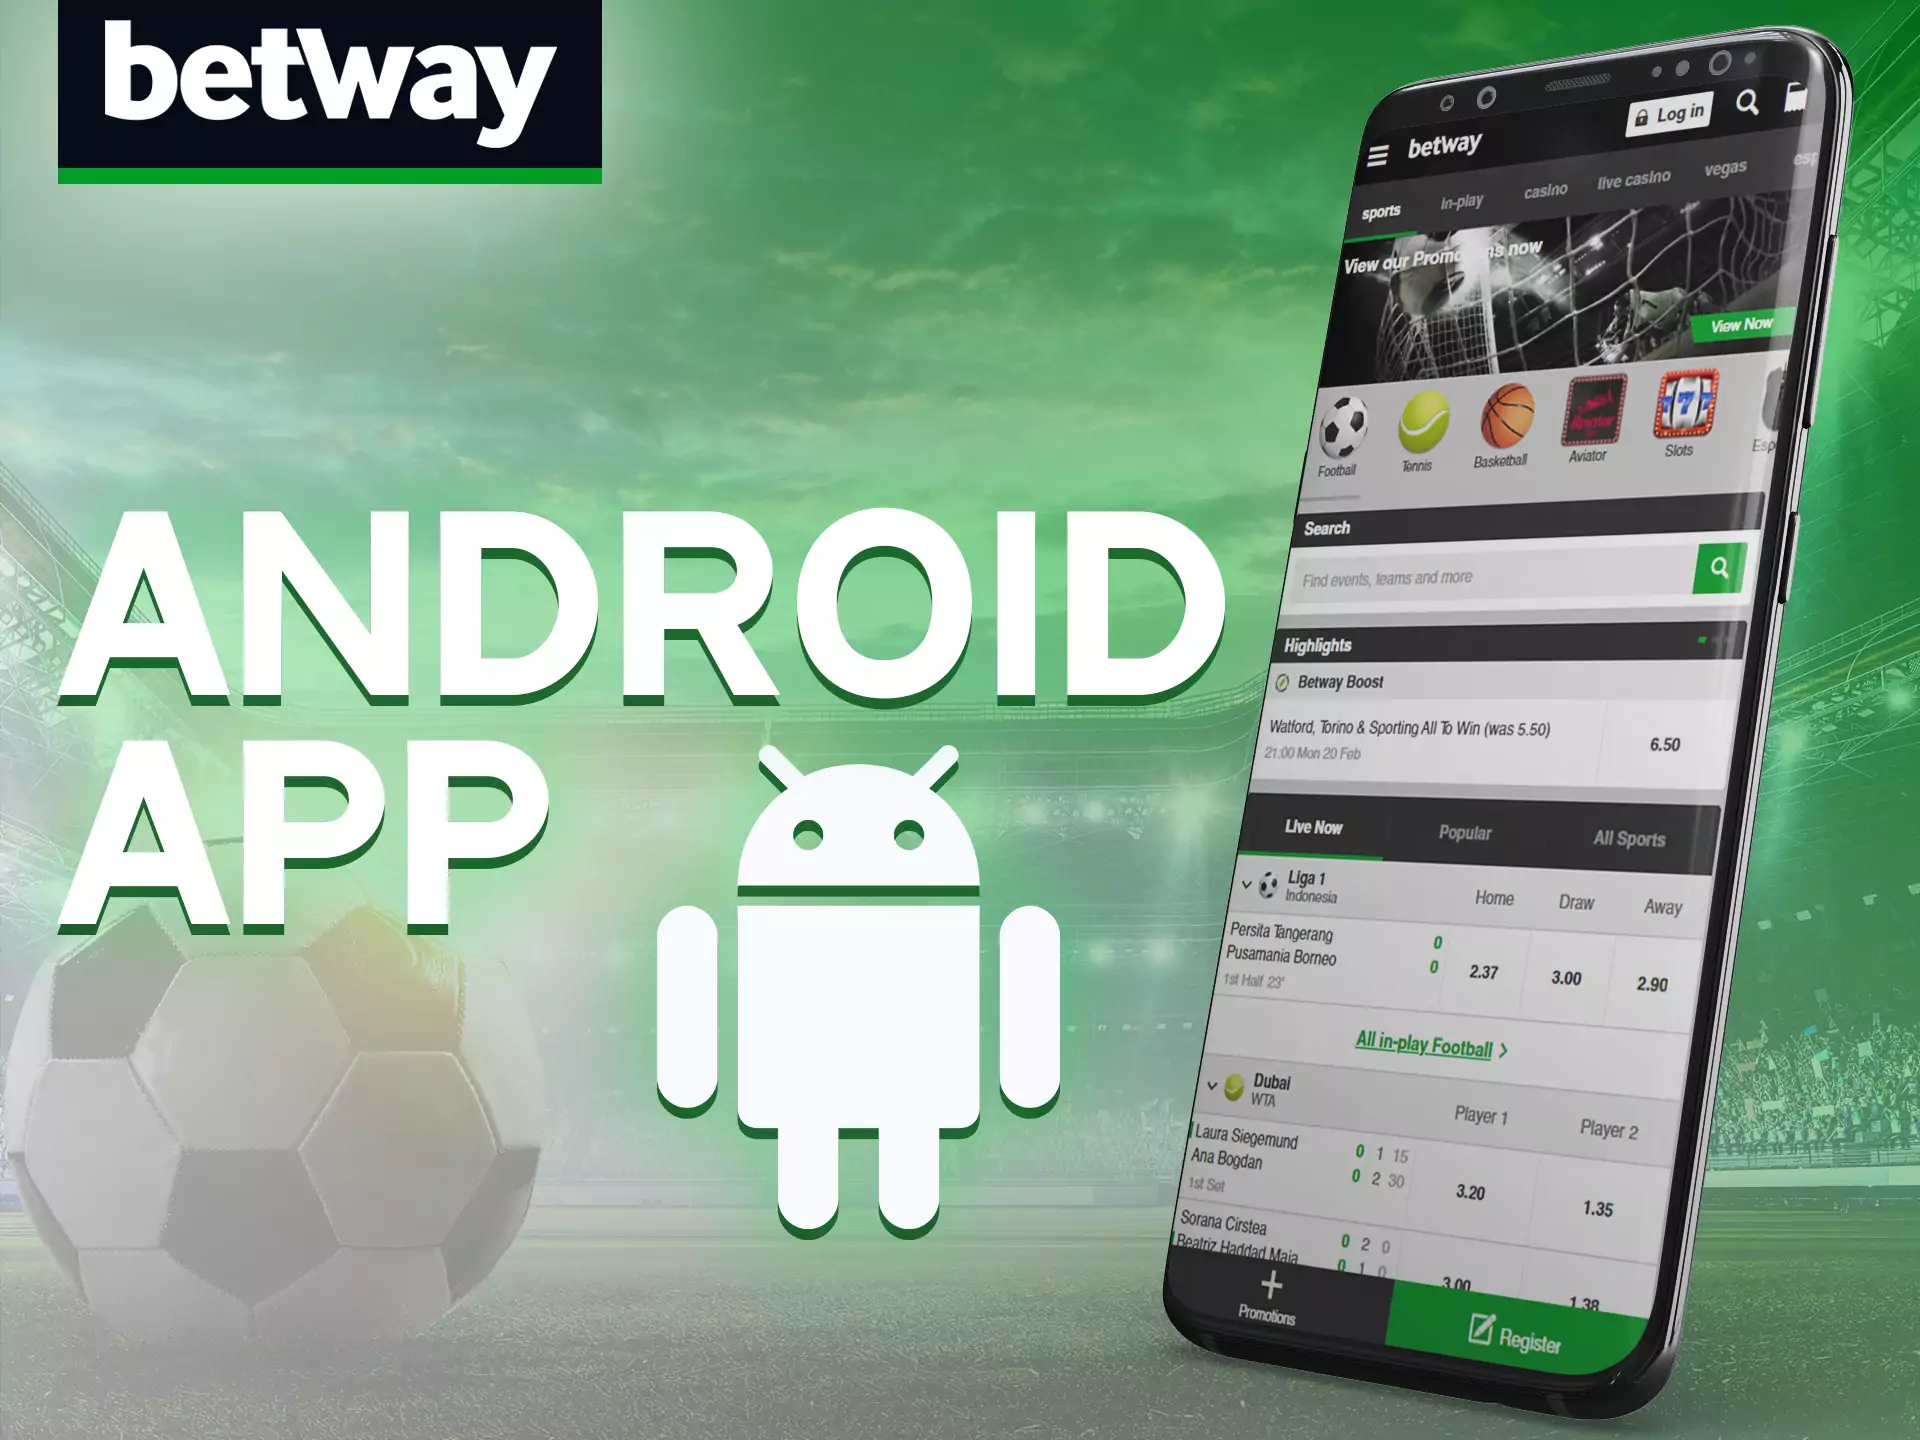 You can use all of the Betway options on your Android device.